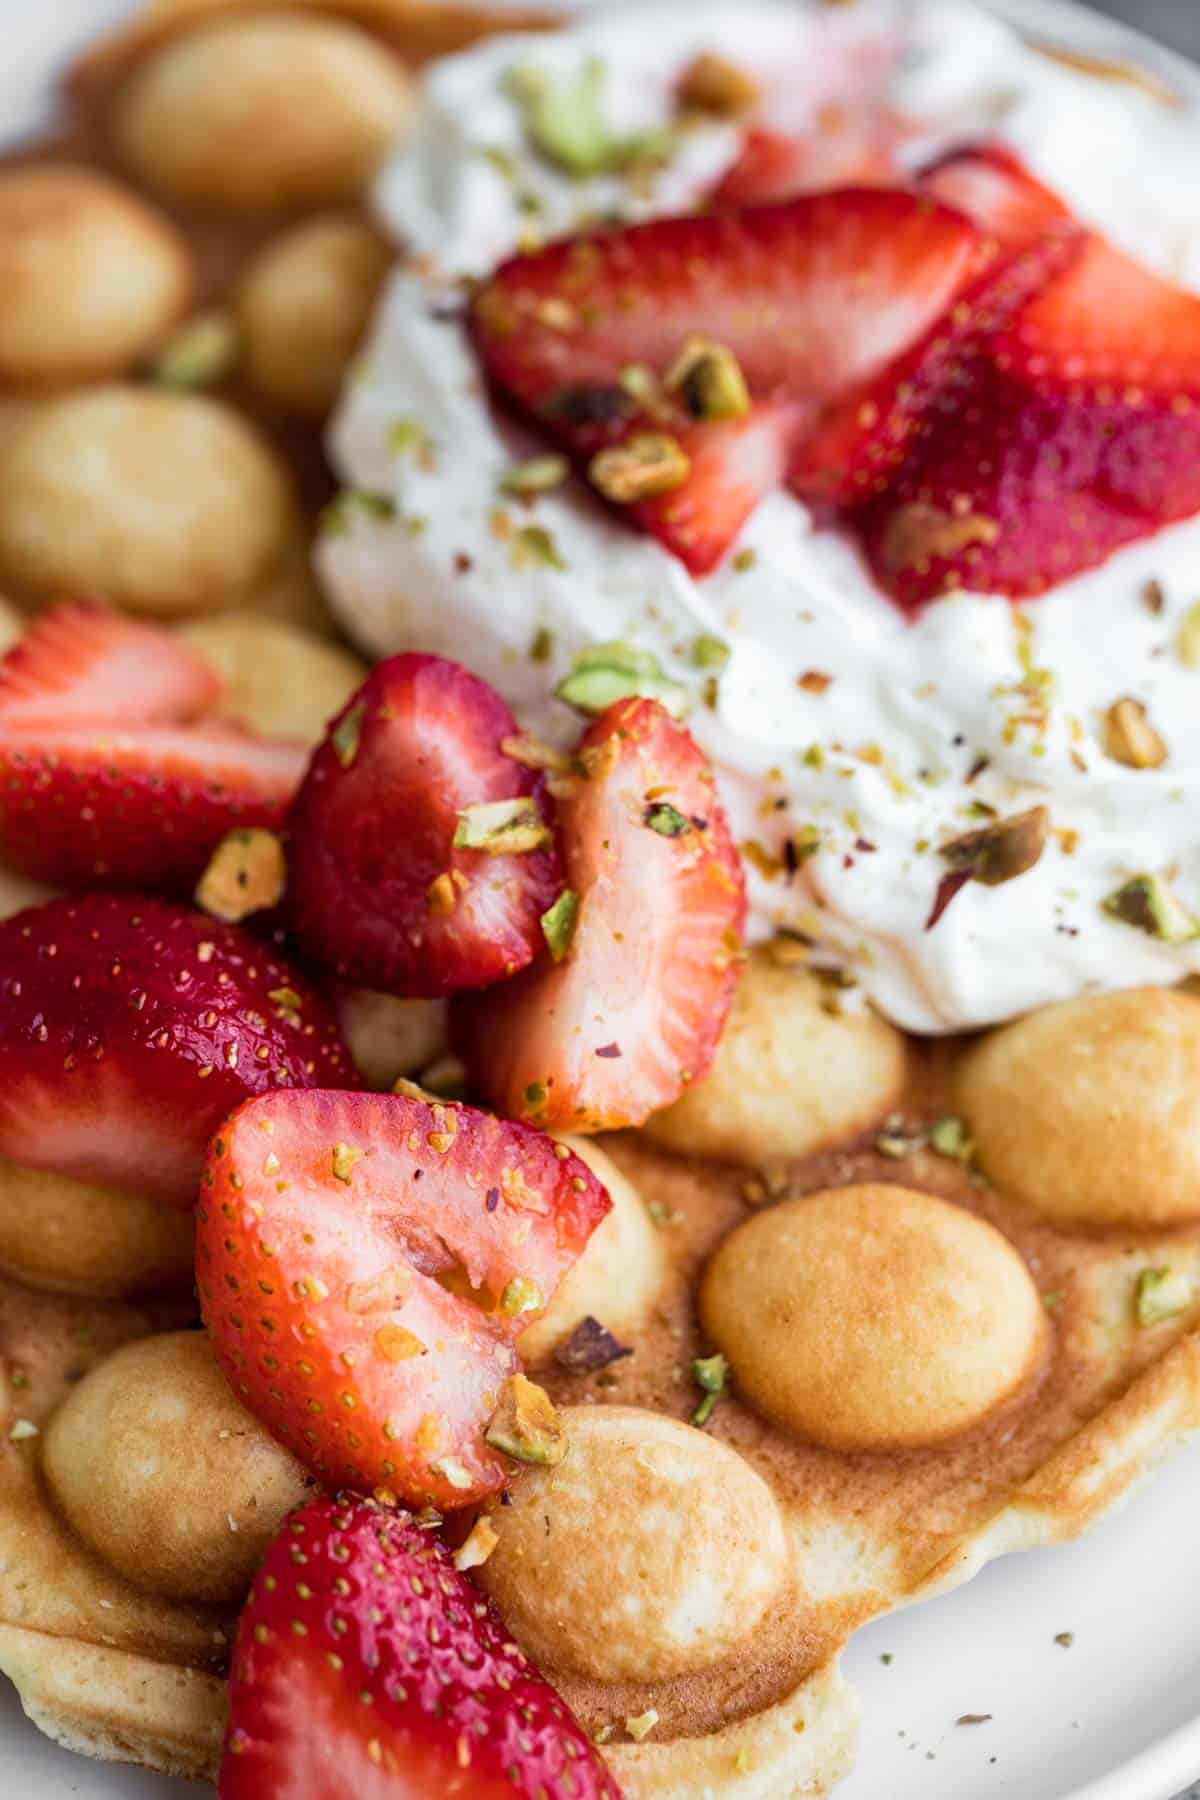 Bubble Waffles with strawberries, cream and pistachios.